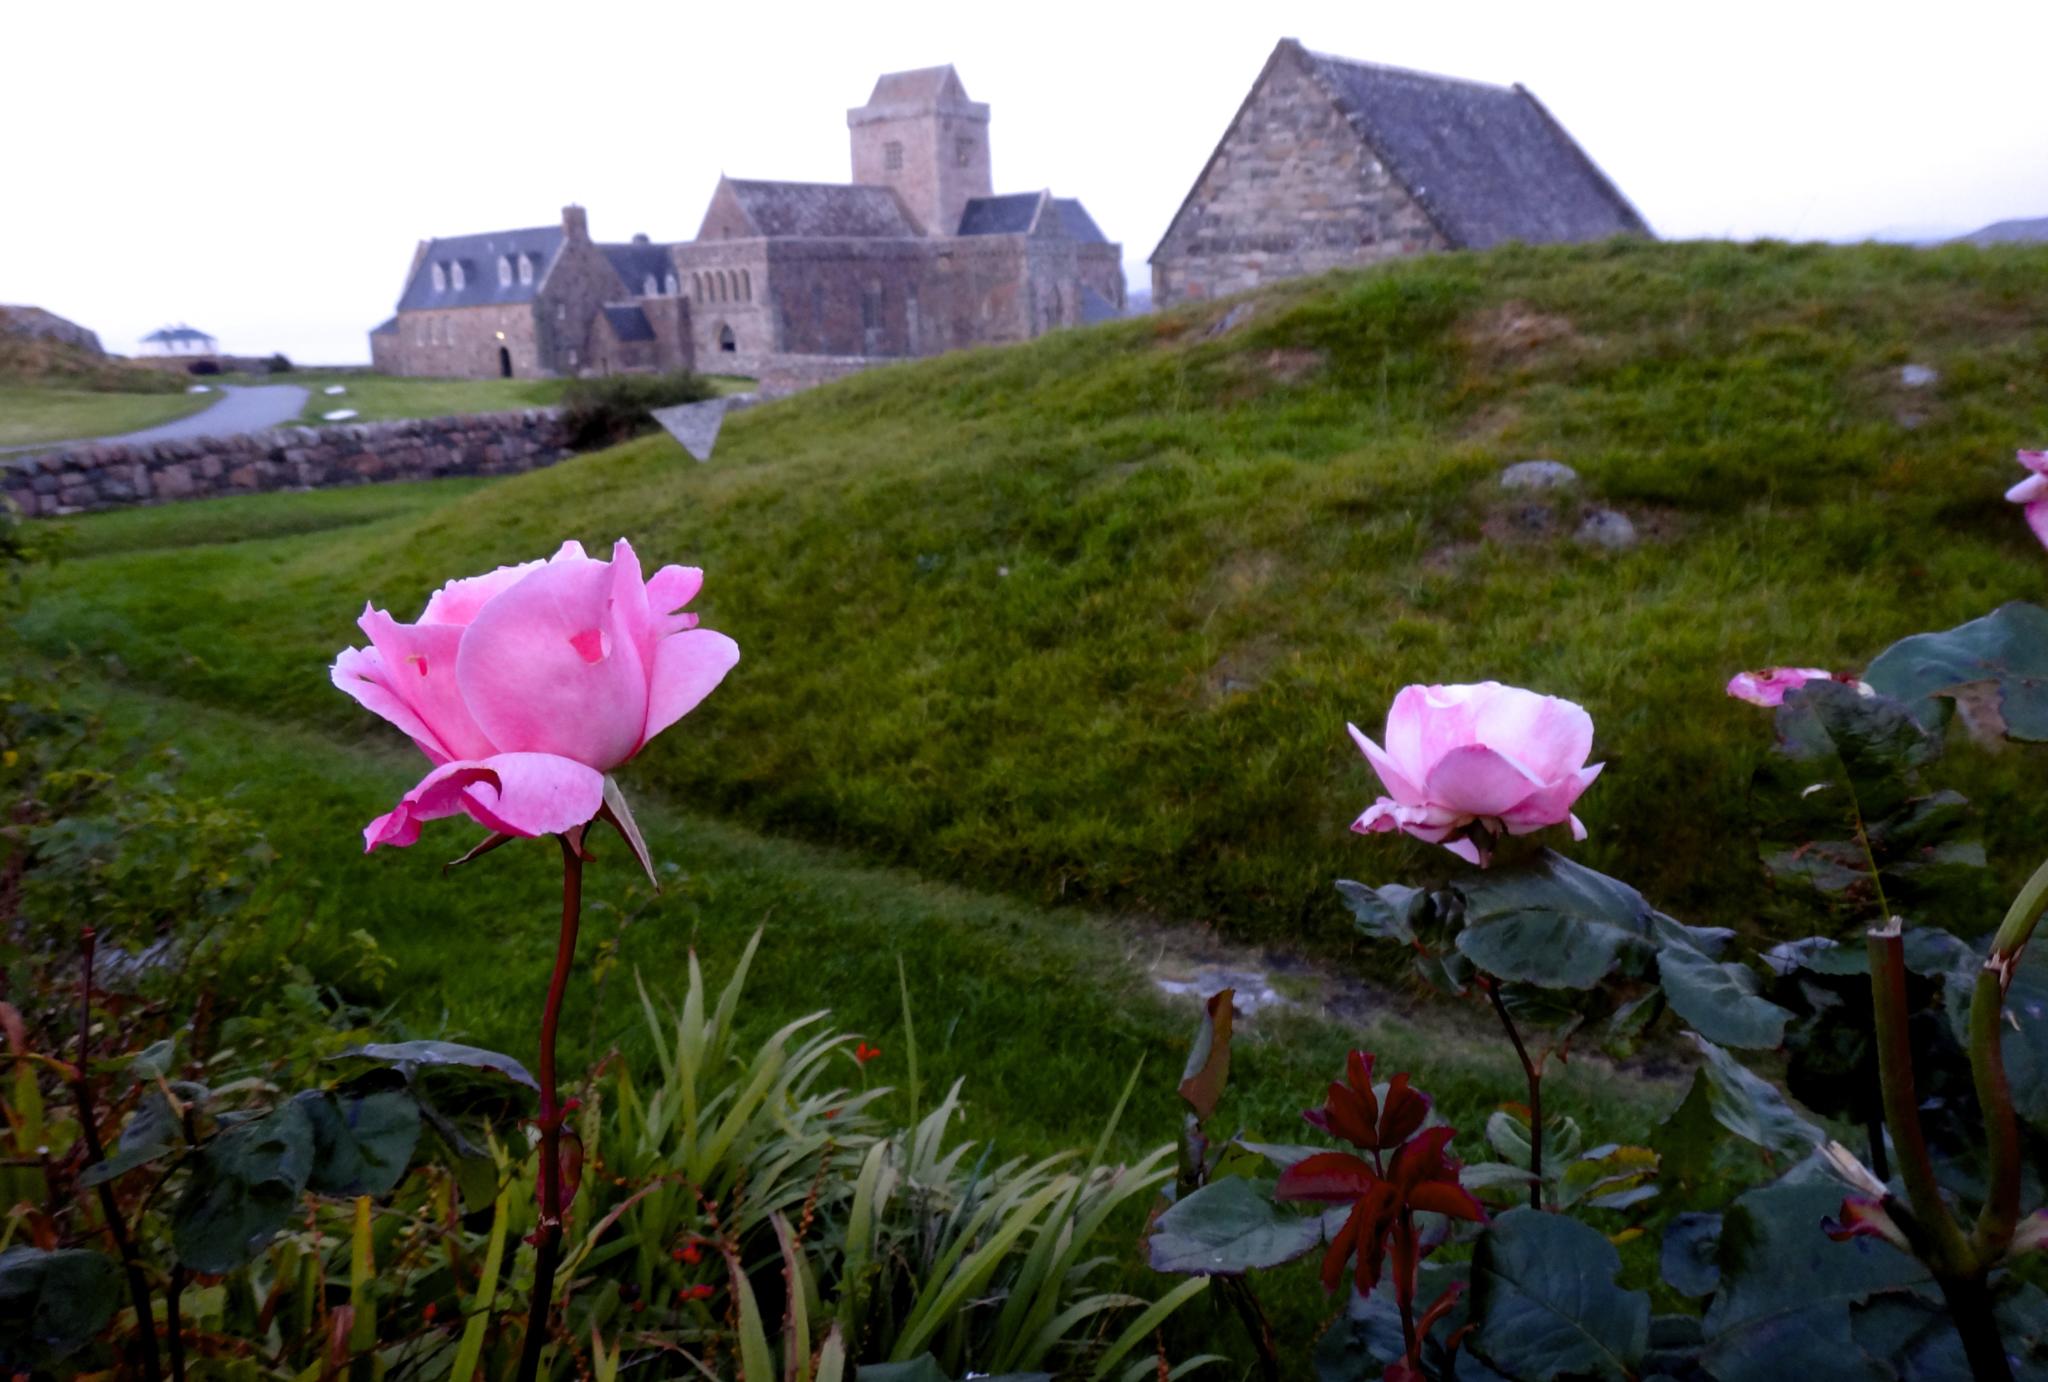 Iona -The last roses of summer frame the view to the Abbey